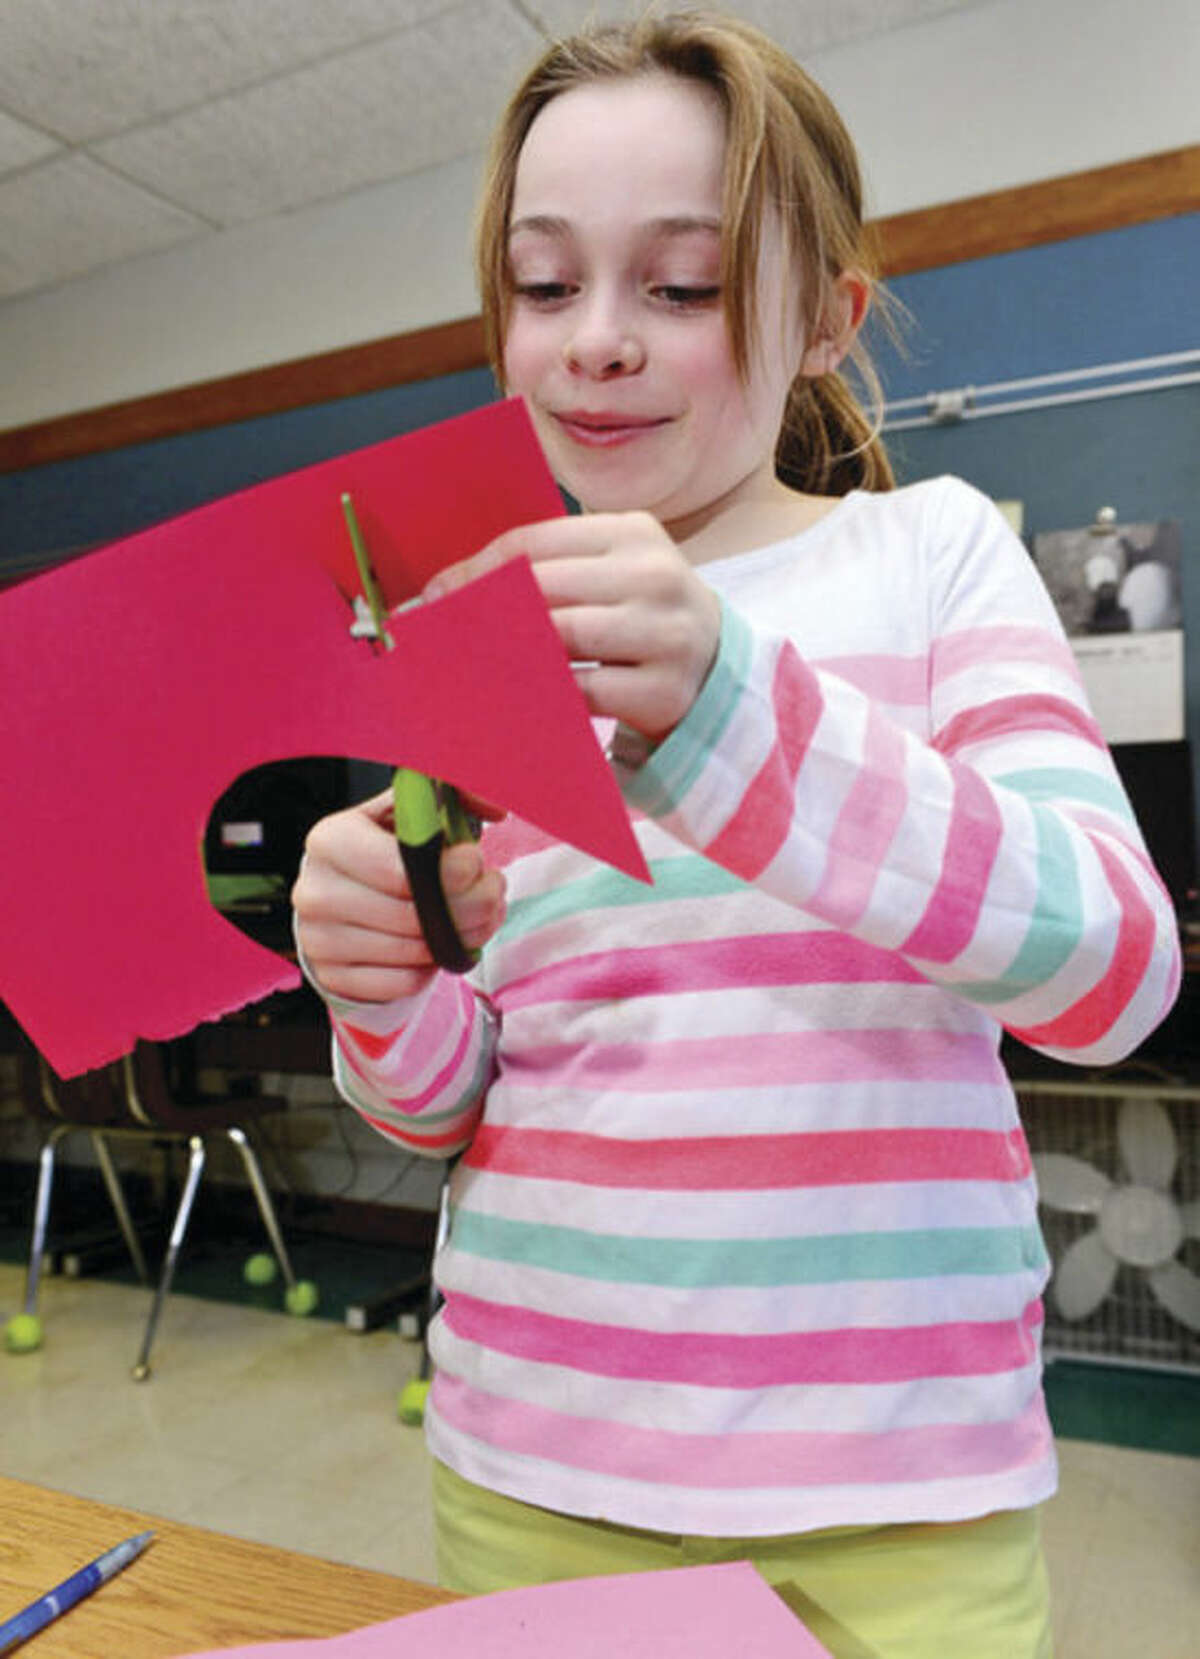 Hour photo / Erik Trautmann Rowayton Elementary School 4th graders is Maura Fried's class make valentines Tuesday for veterans at the VA Hospital in West Haven.